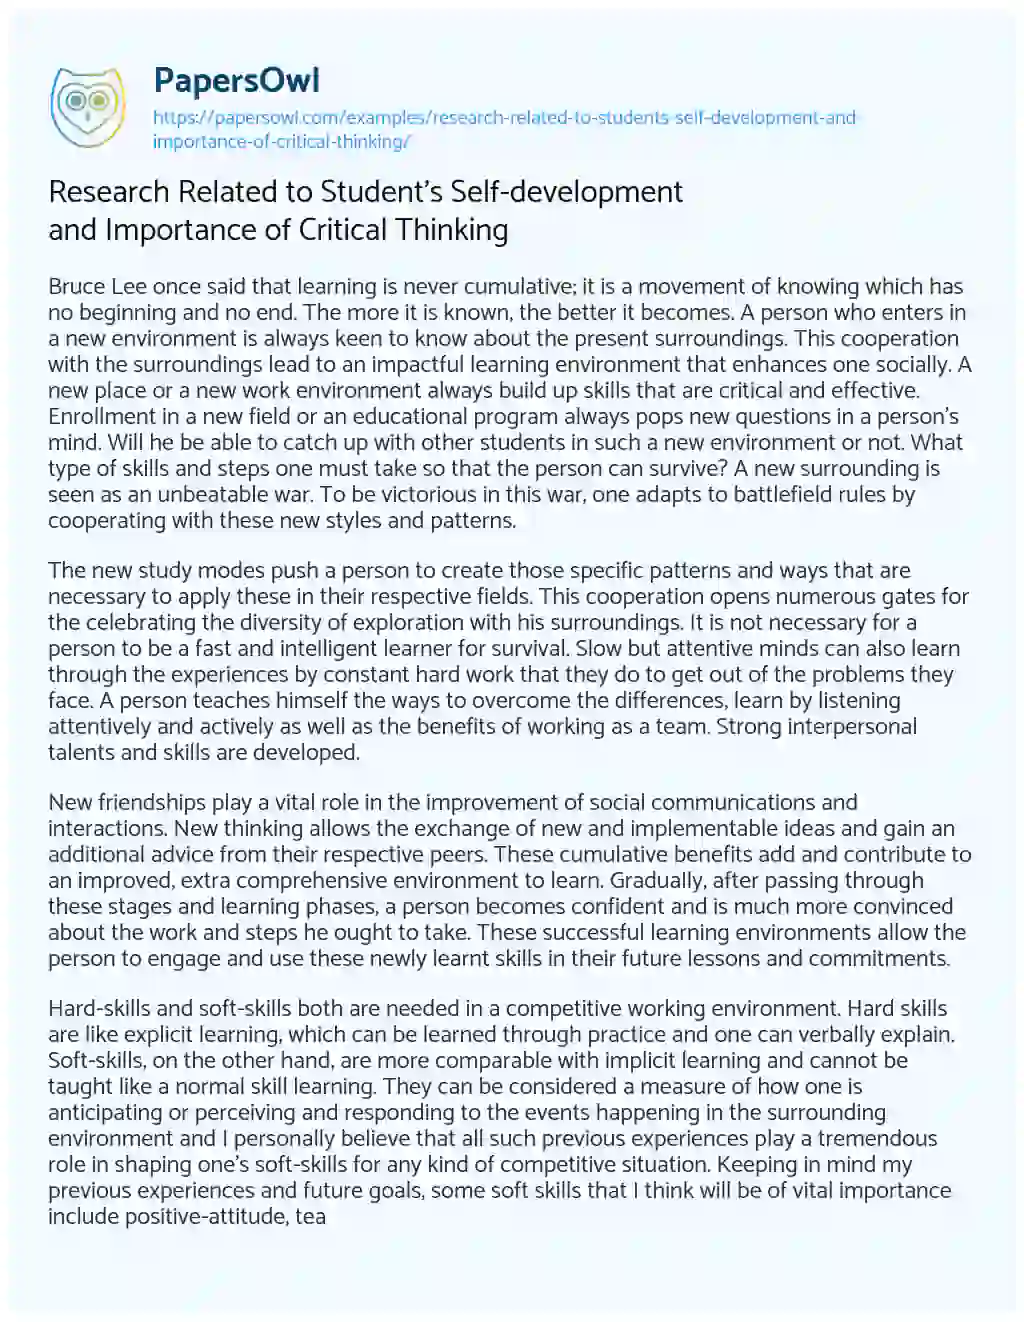 Research Related to Student’s Self-development and Importance of Critical Thinking essay